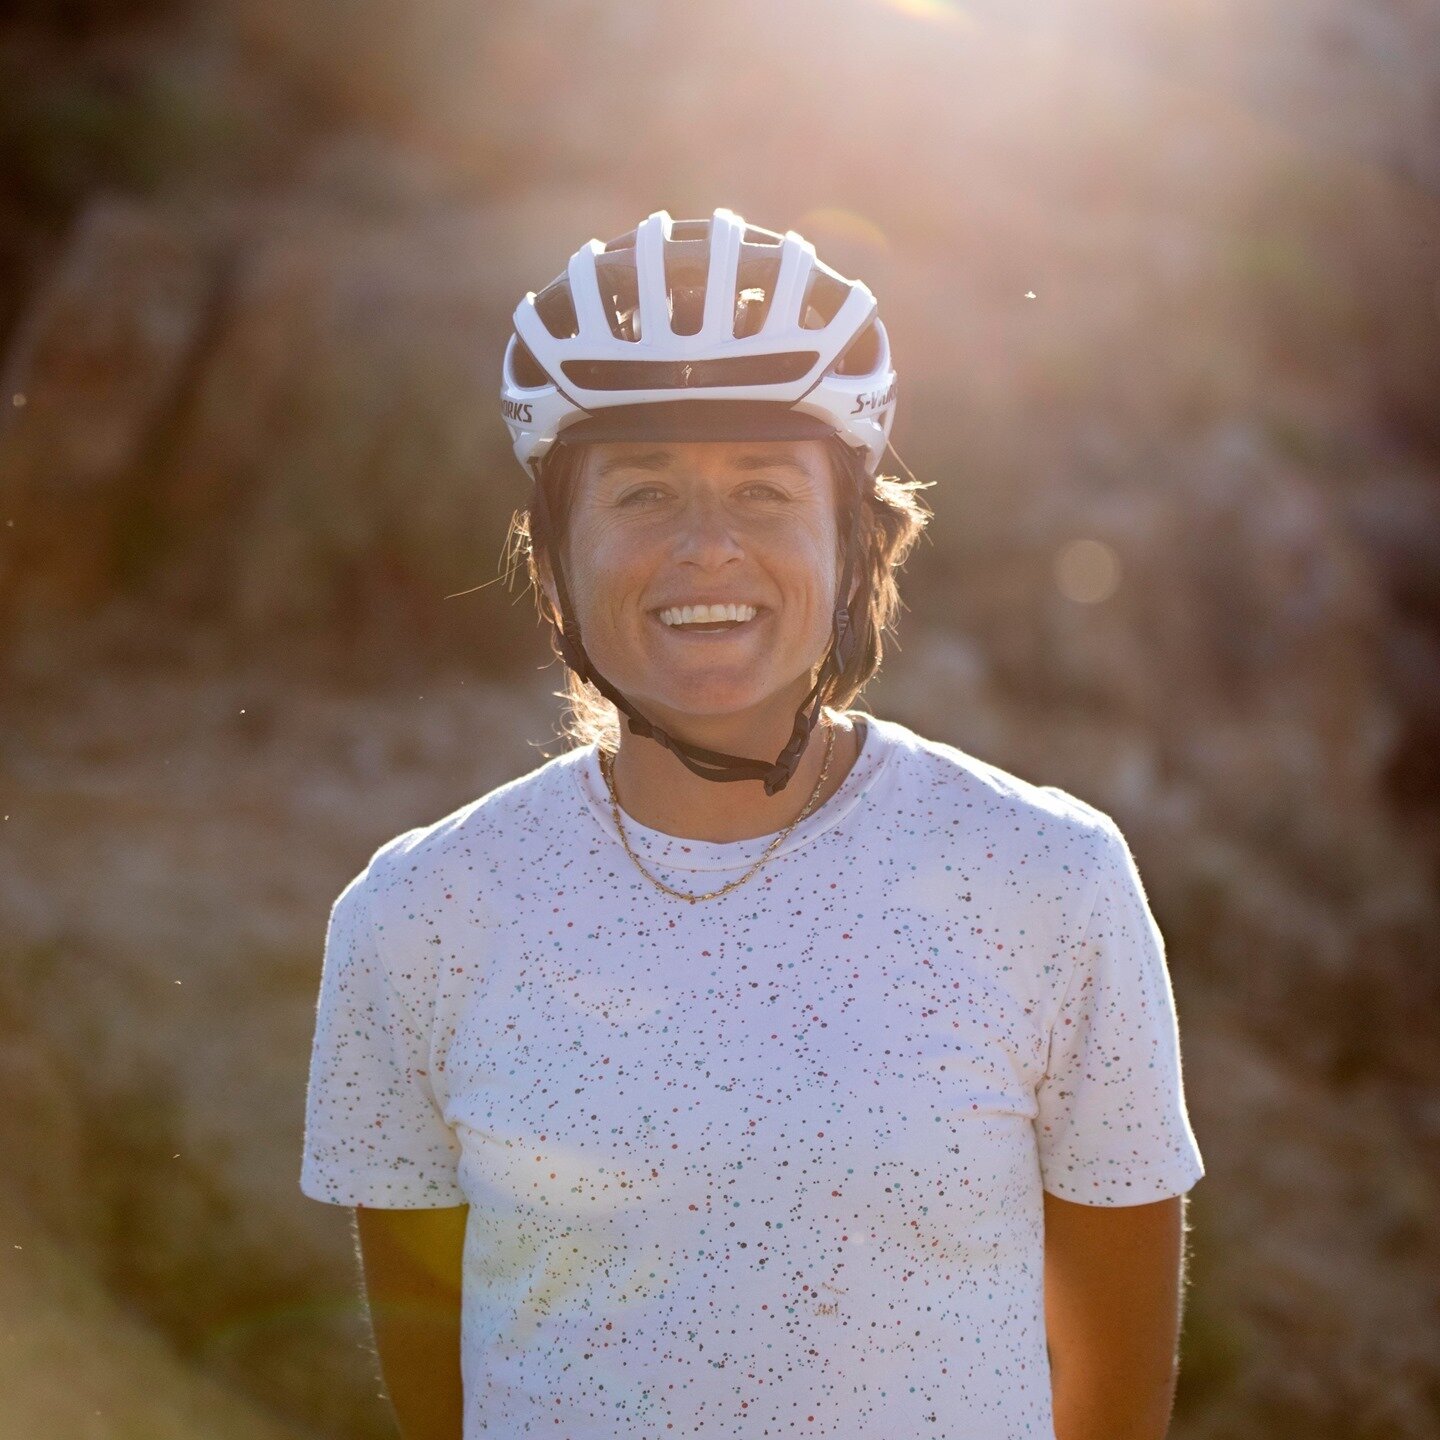 Outride Ambassador Lael Wilcox is an ultra-endurance cyclist.

In 2016, she won the Trans Am Bike Race, a 4,300-mile self-supported race across the U.S. from Oregon to Virginia in a mixed gender field.

&quot;Could we erase gender categories from bik